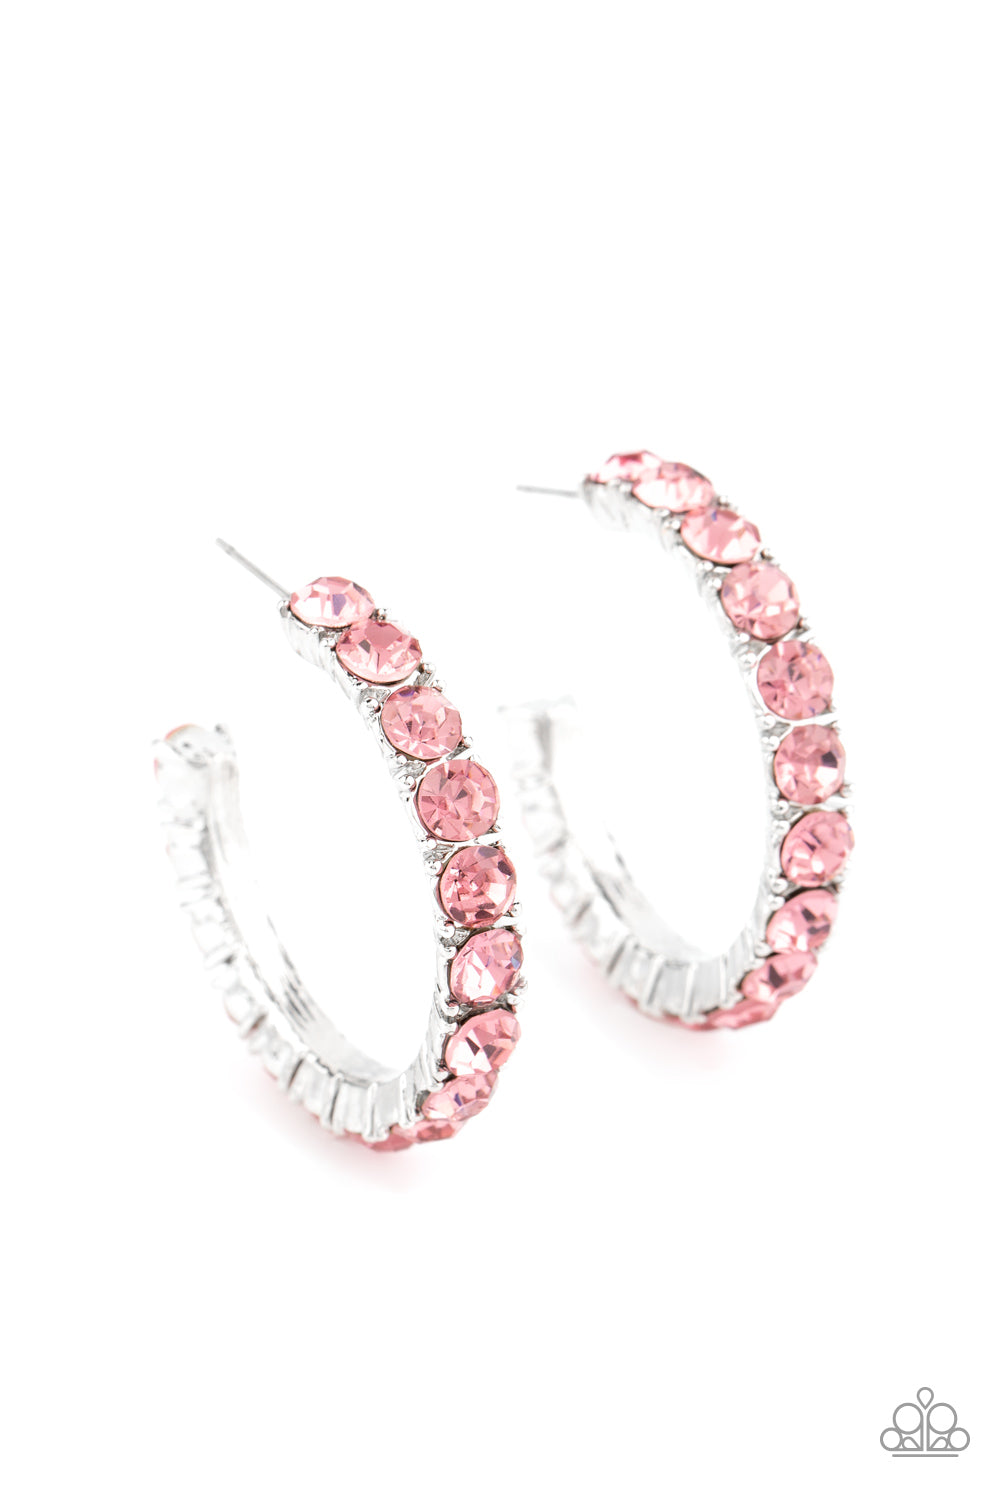 CLASSY is in Session - pink - Paparazzi earrings